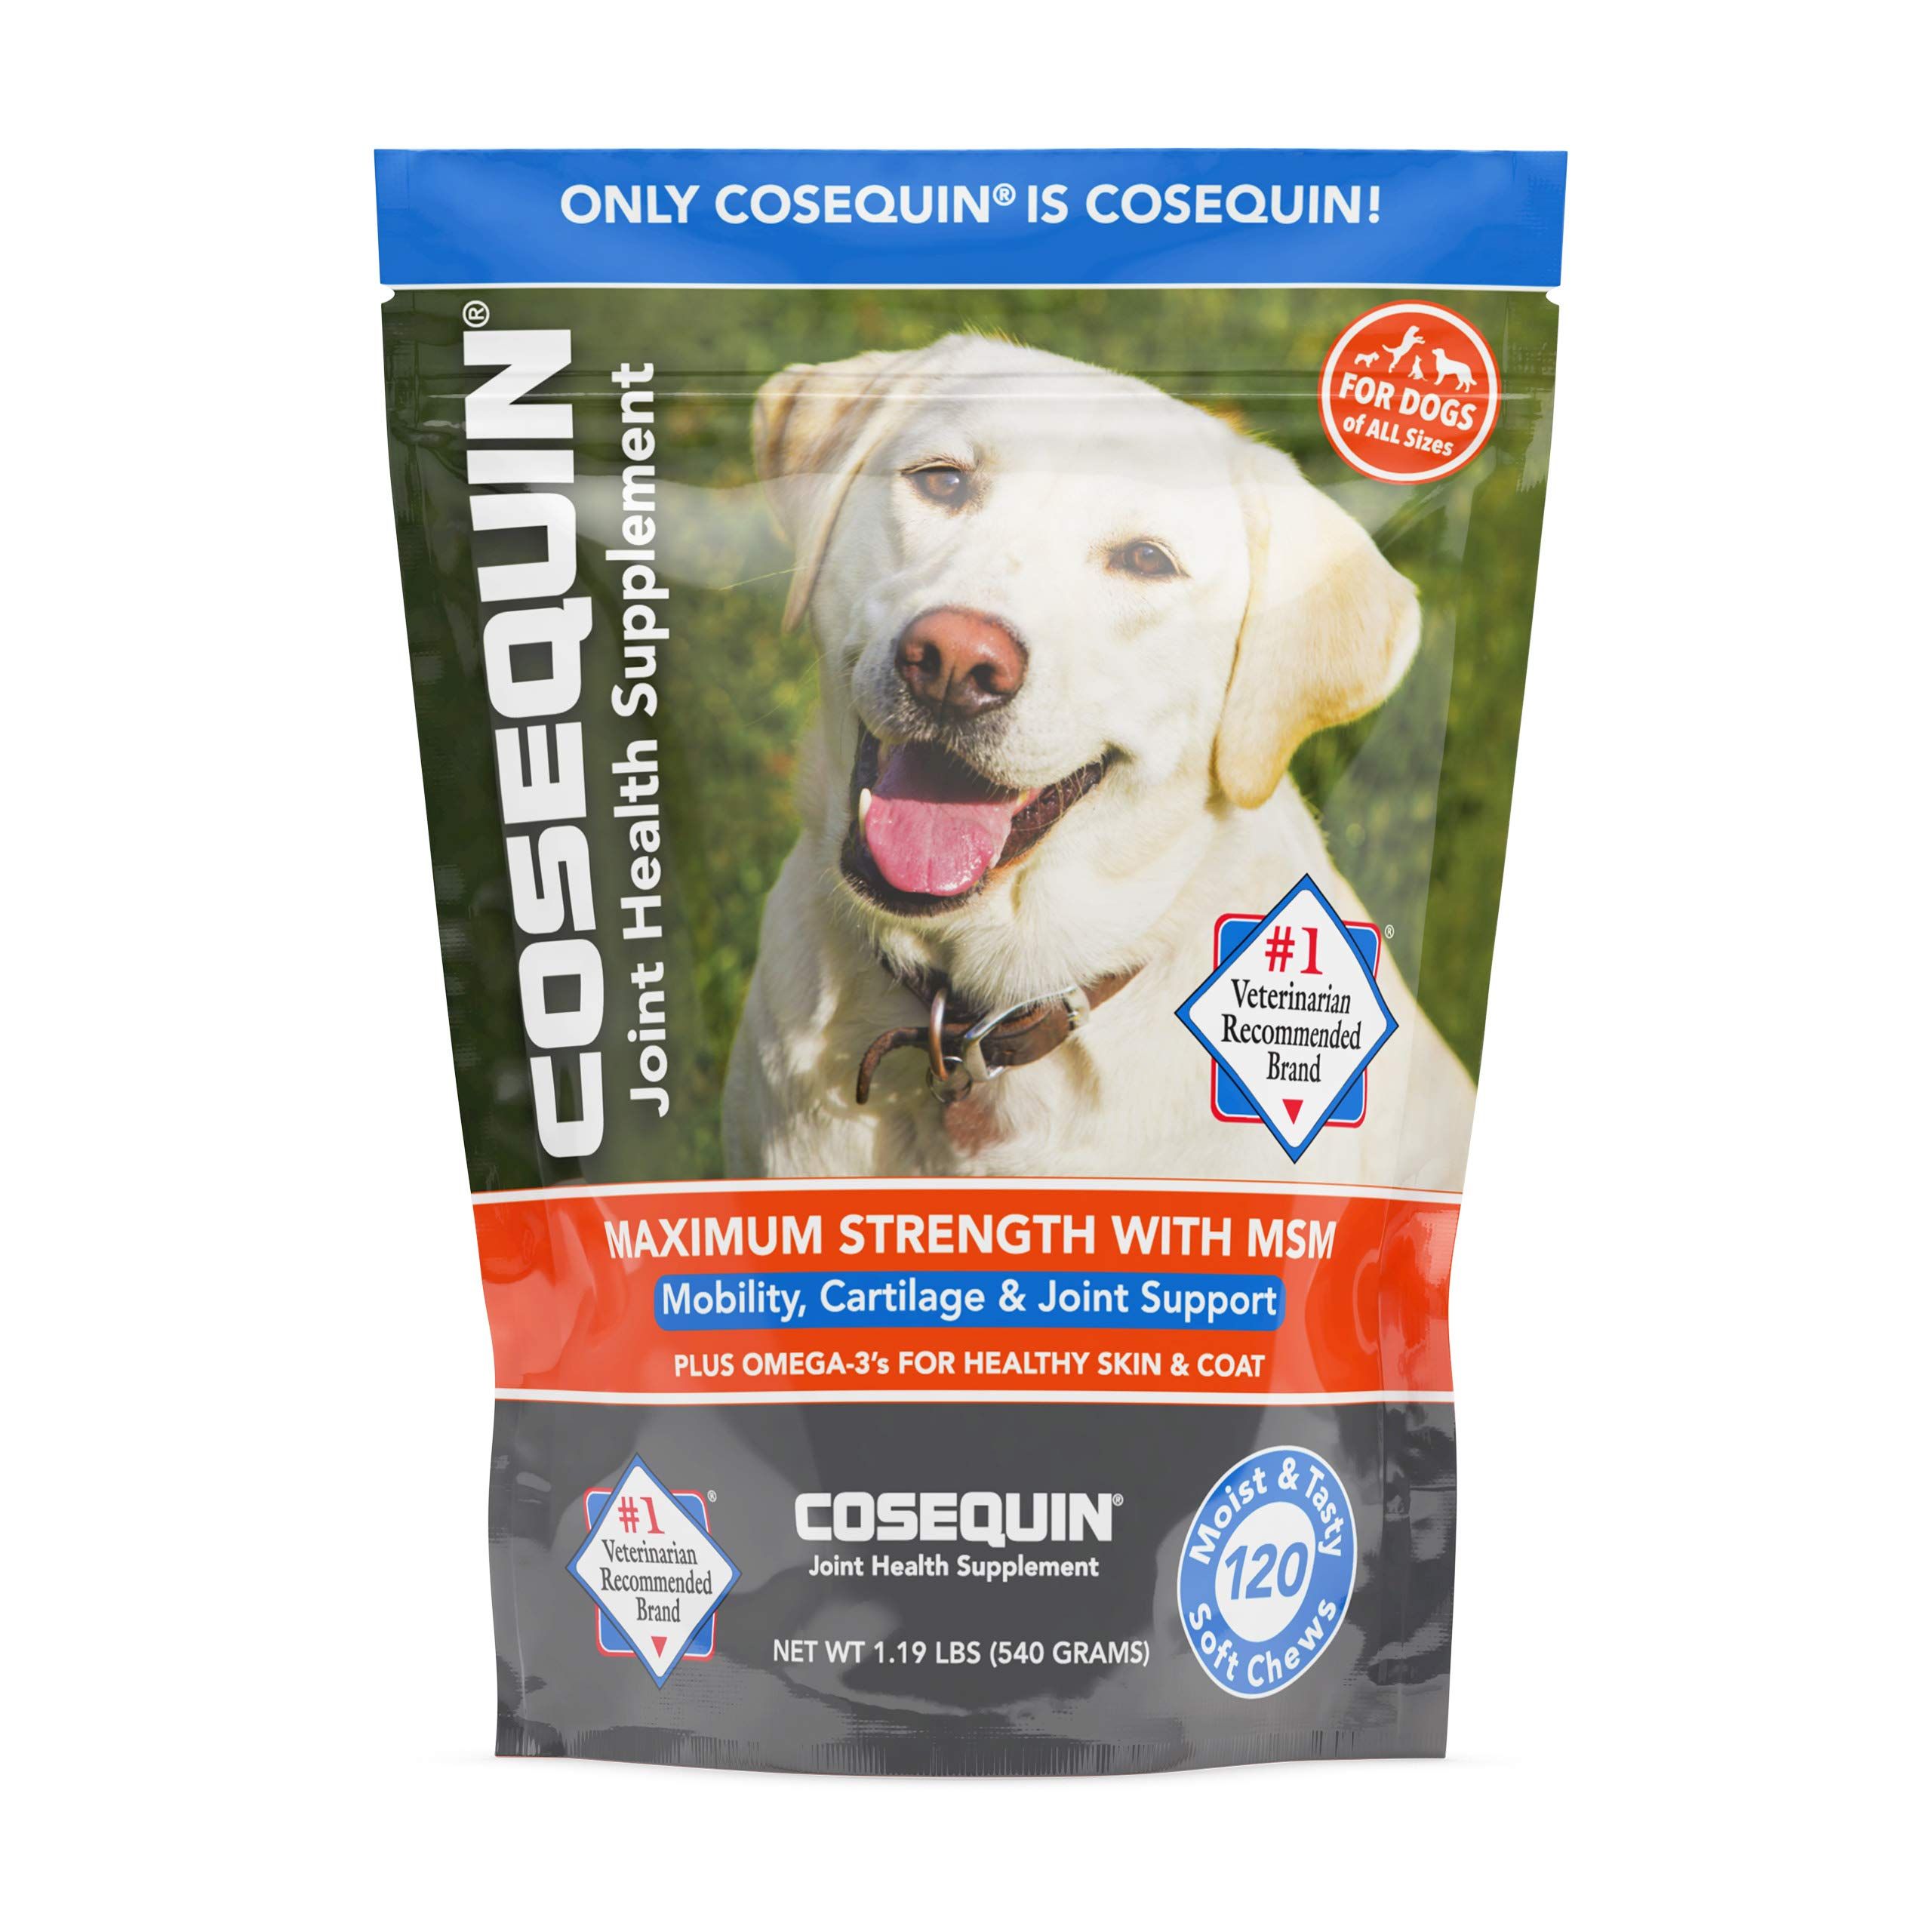 Amazon.com : Nutramax Cosequin Joint Health Supplement for Dogs - With  Glucosamine, Chondroitin, MSM, and Omega-3's, 120 Soft Chews : Pet Supplies